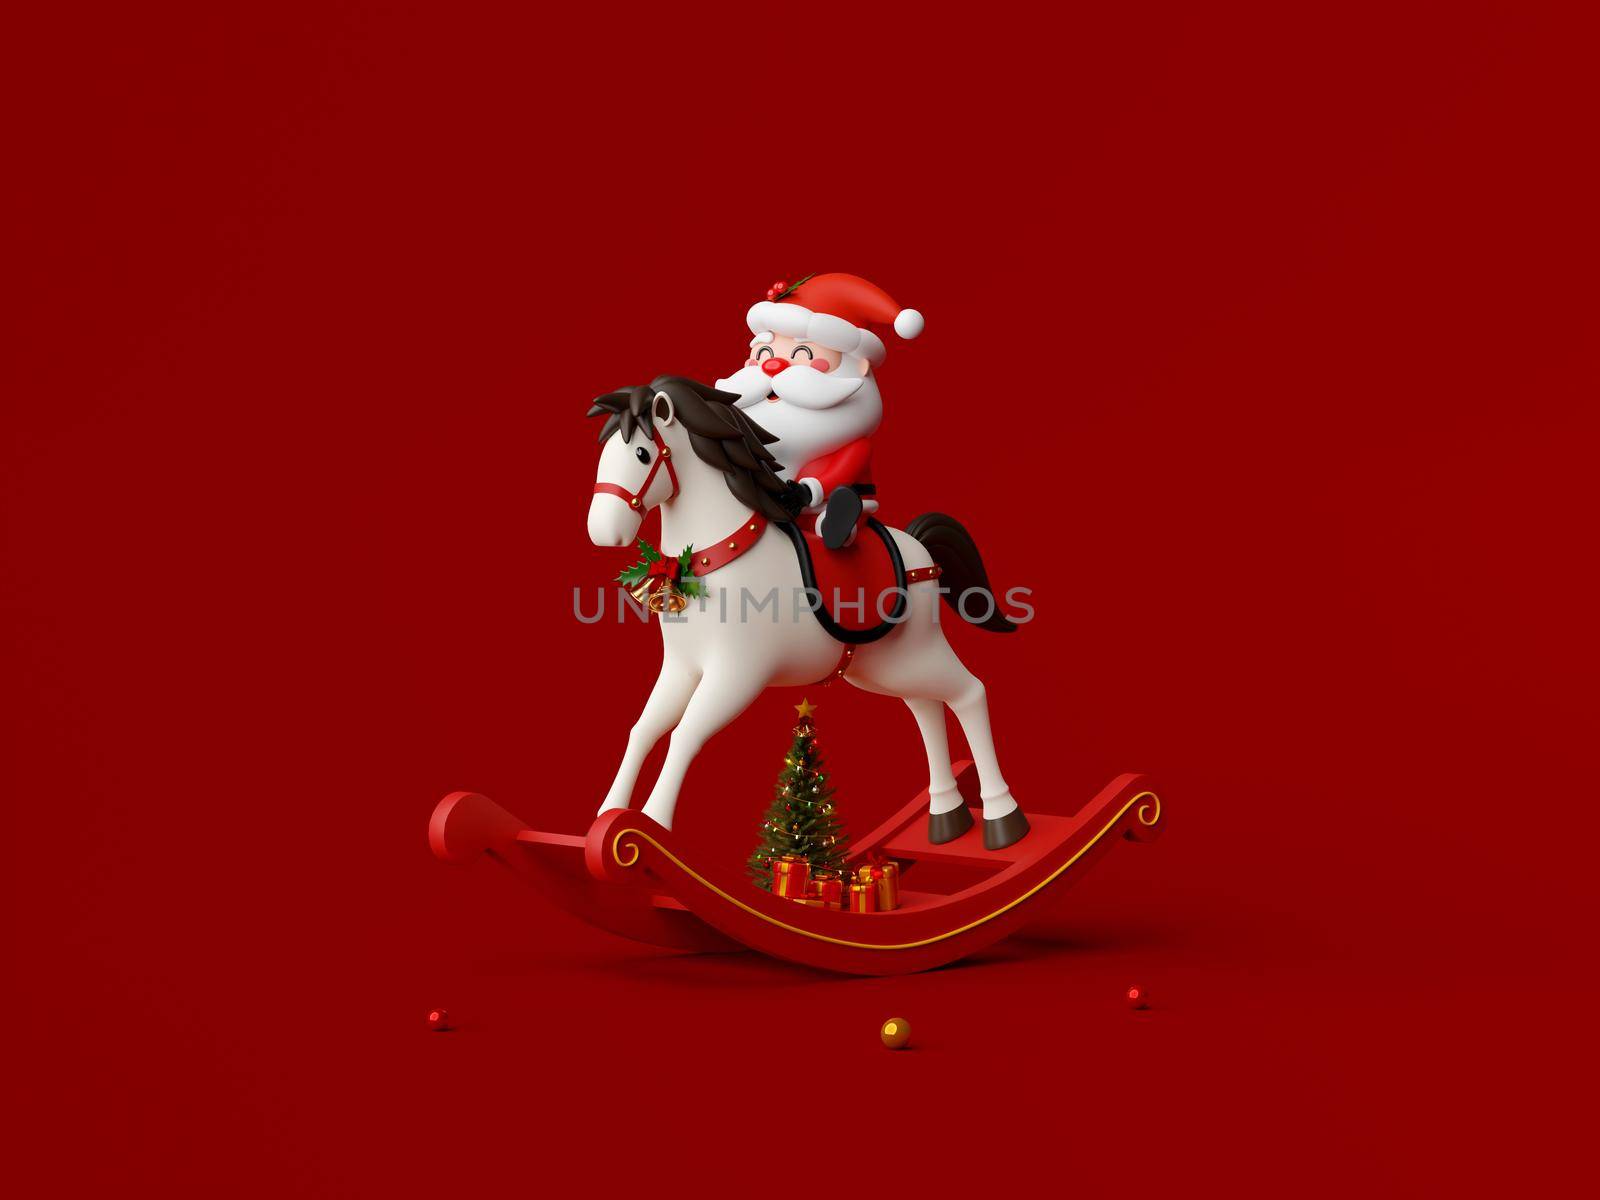 3d illustration of Santa Claus riding rocking horse on red background